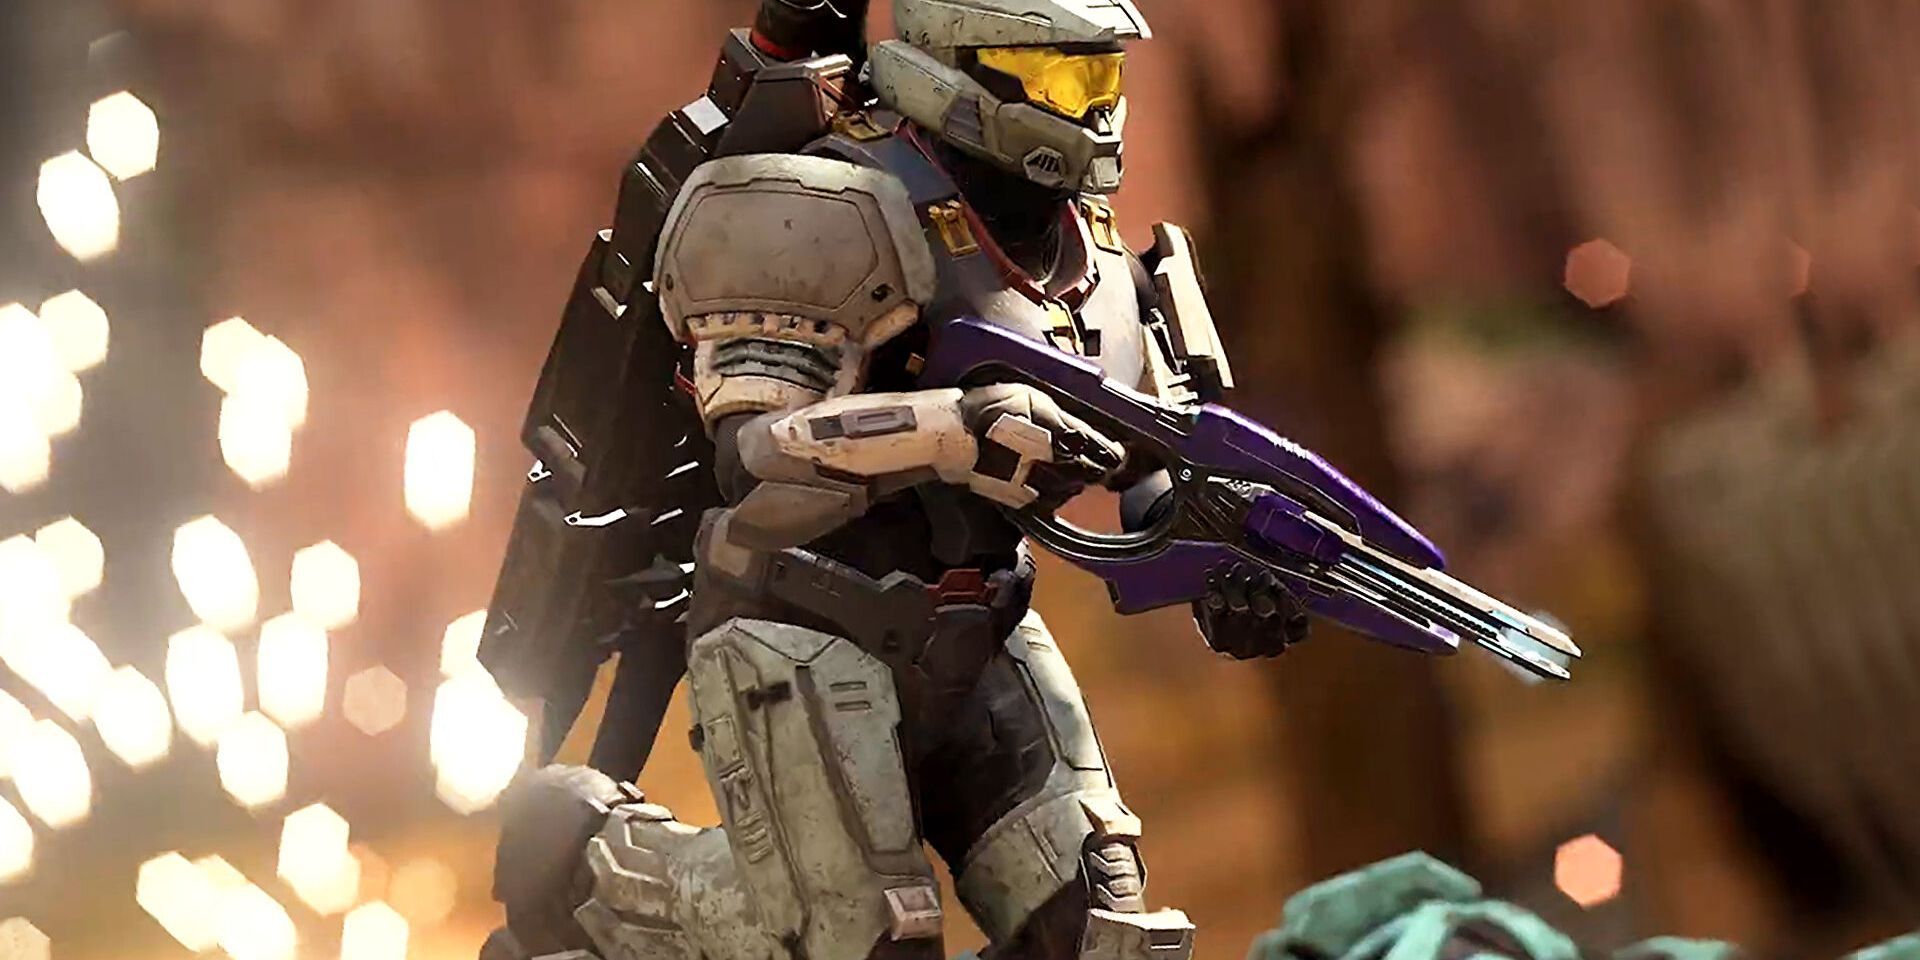 A promo image for Halo Infinite showing a player running with a rifle